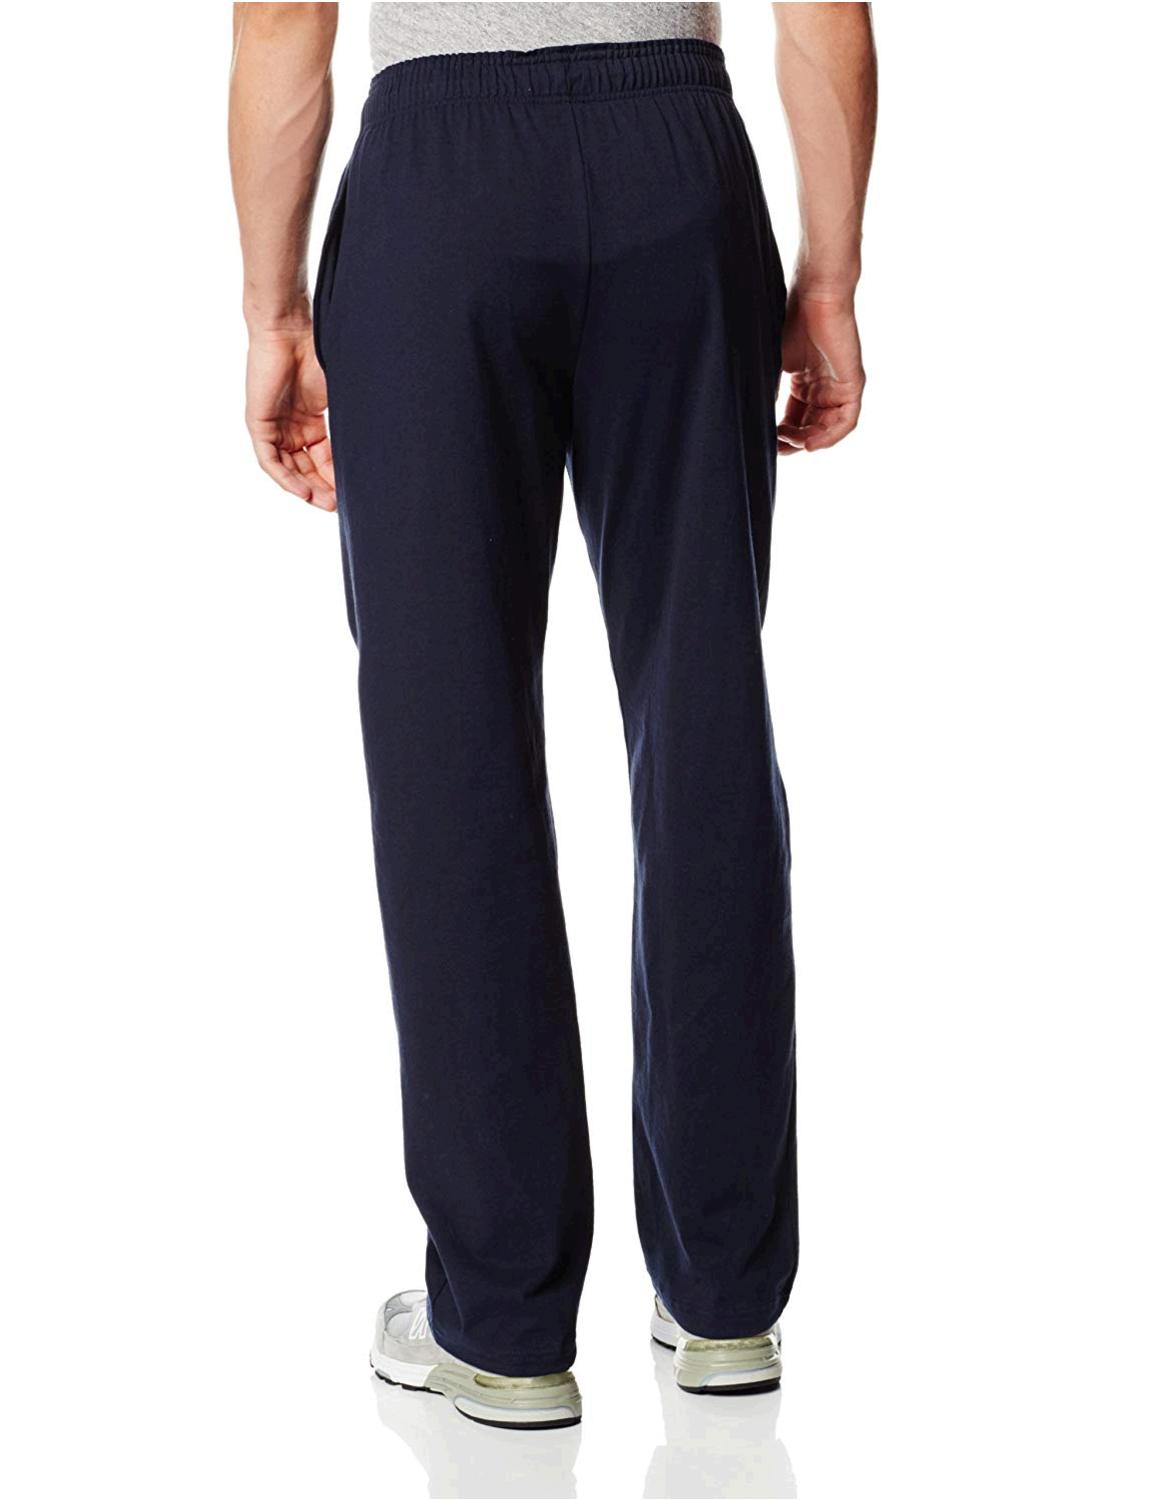 Champion Men's Authentic Open Bottom Jersey Pant, Small - Navy, Navy ...